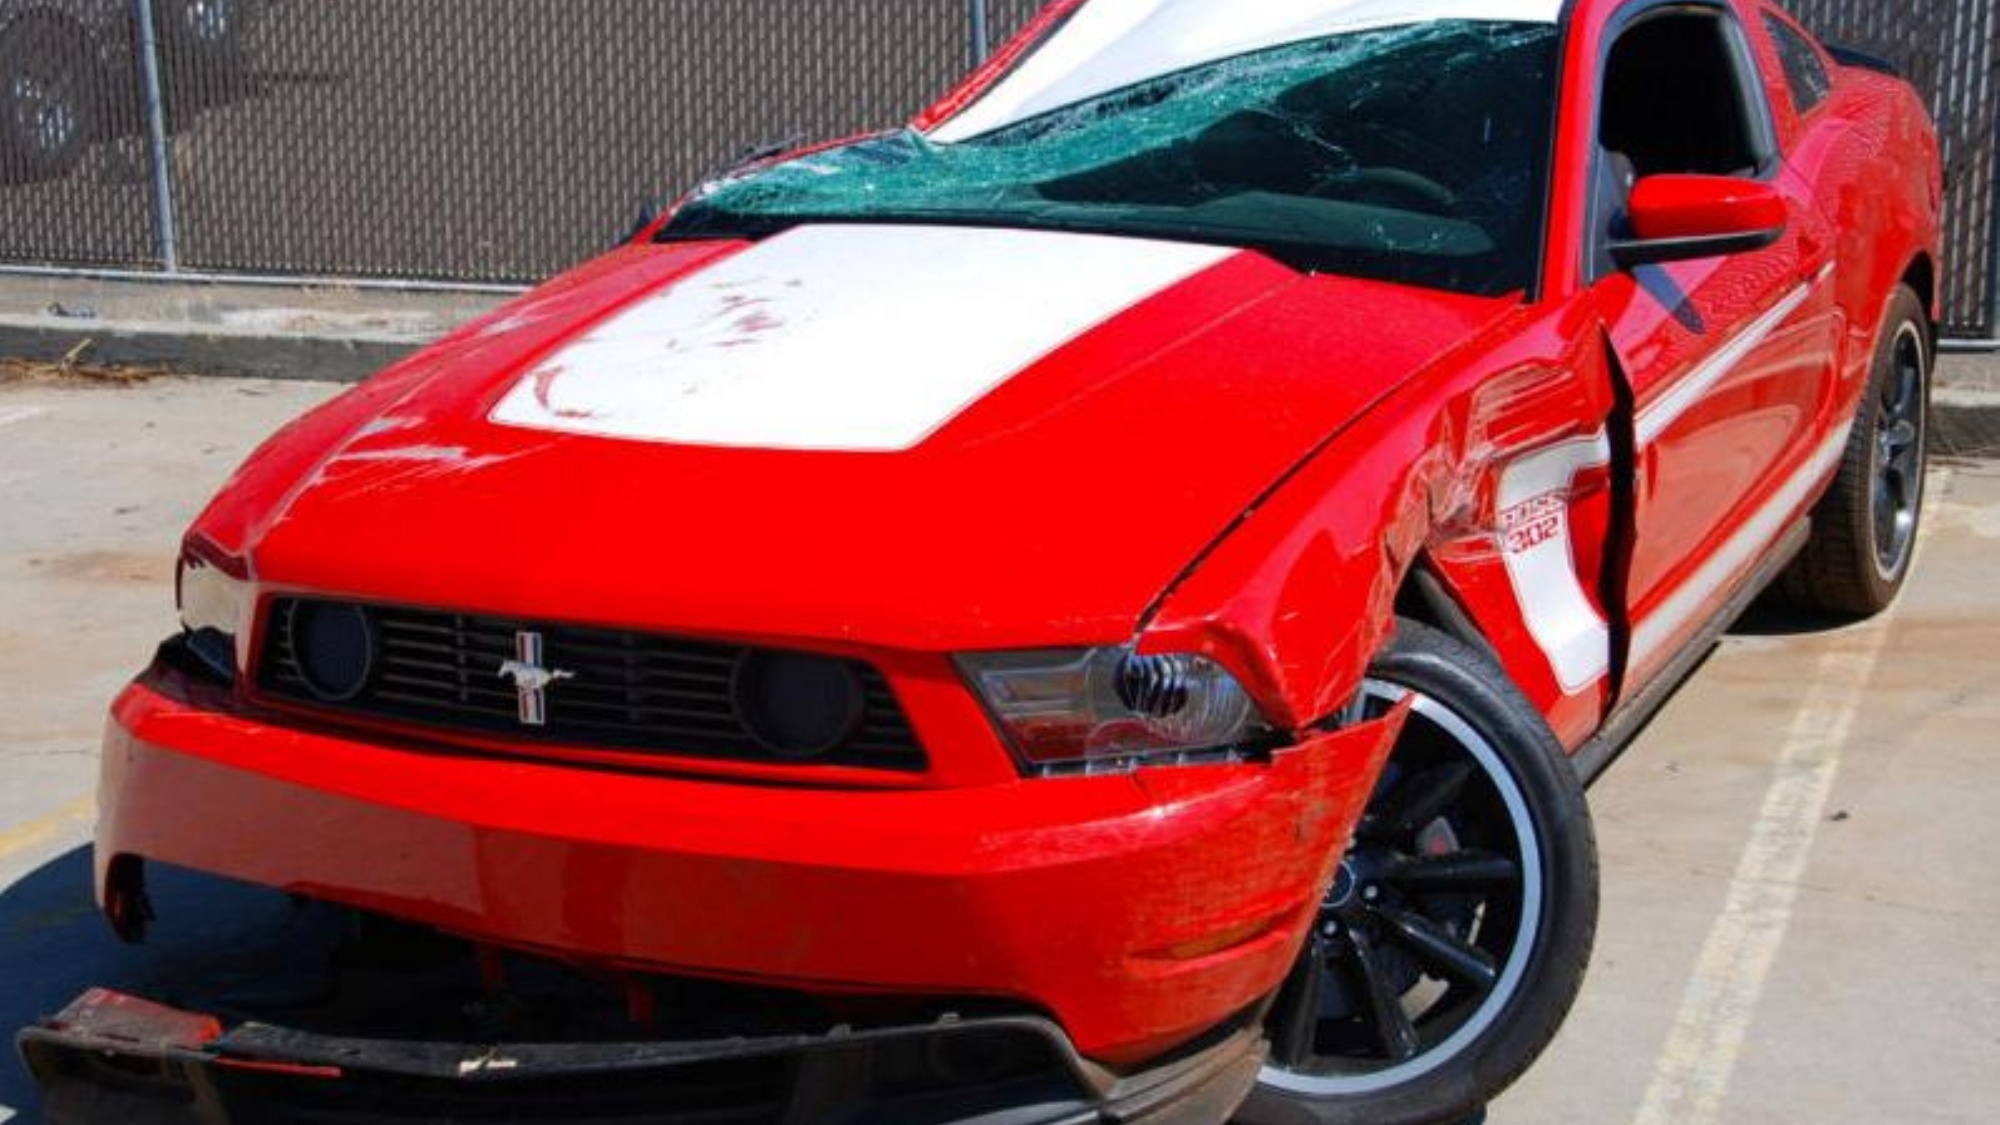 2012 Ford Mustang Boss 302 Crashed And Sold On eBay